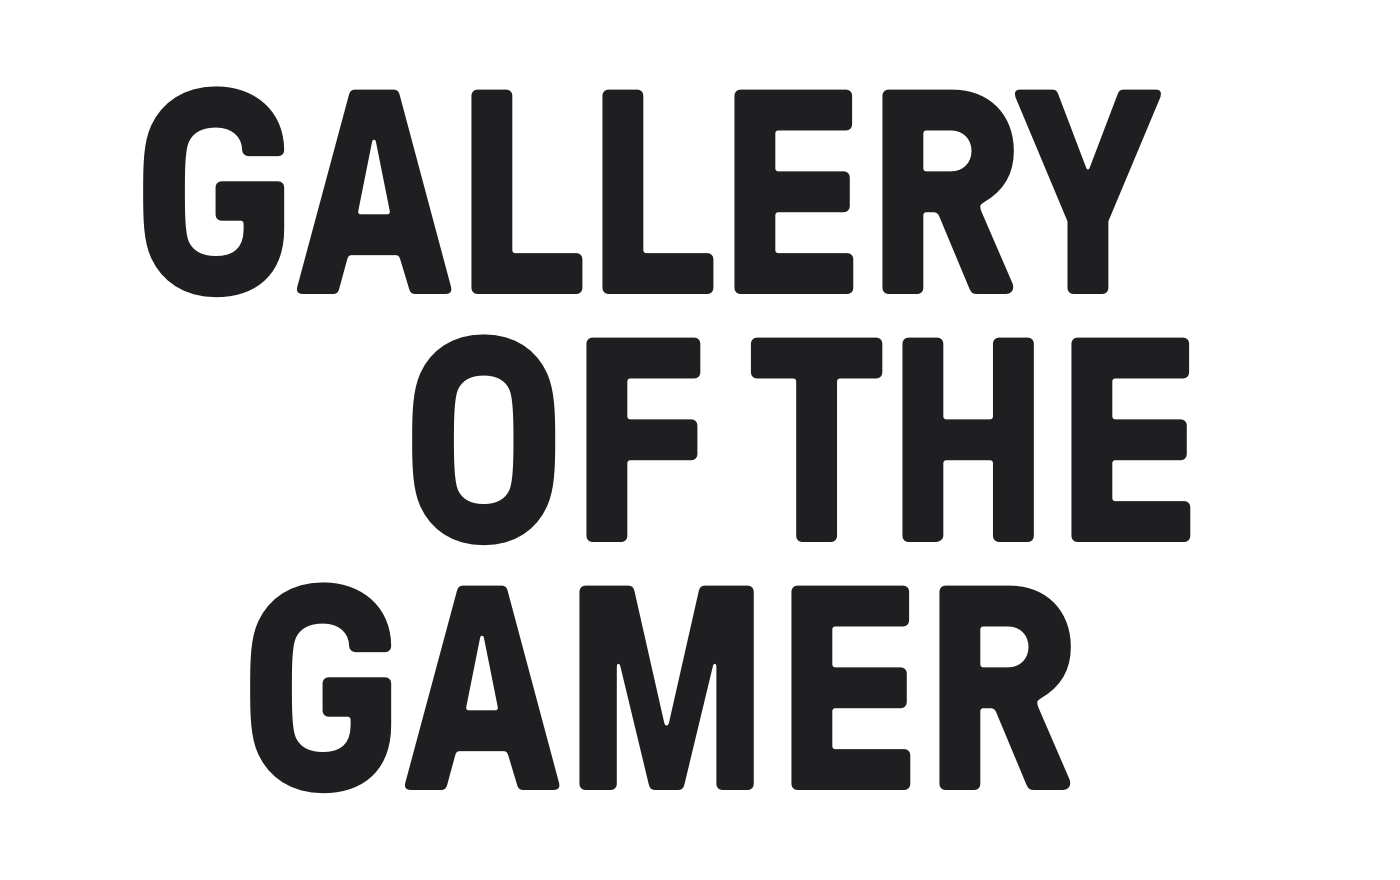 GALLERY OF THE GAMER